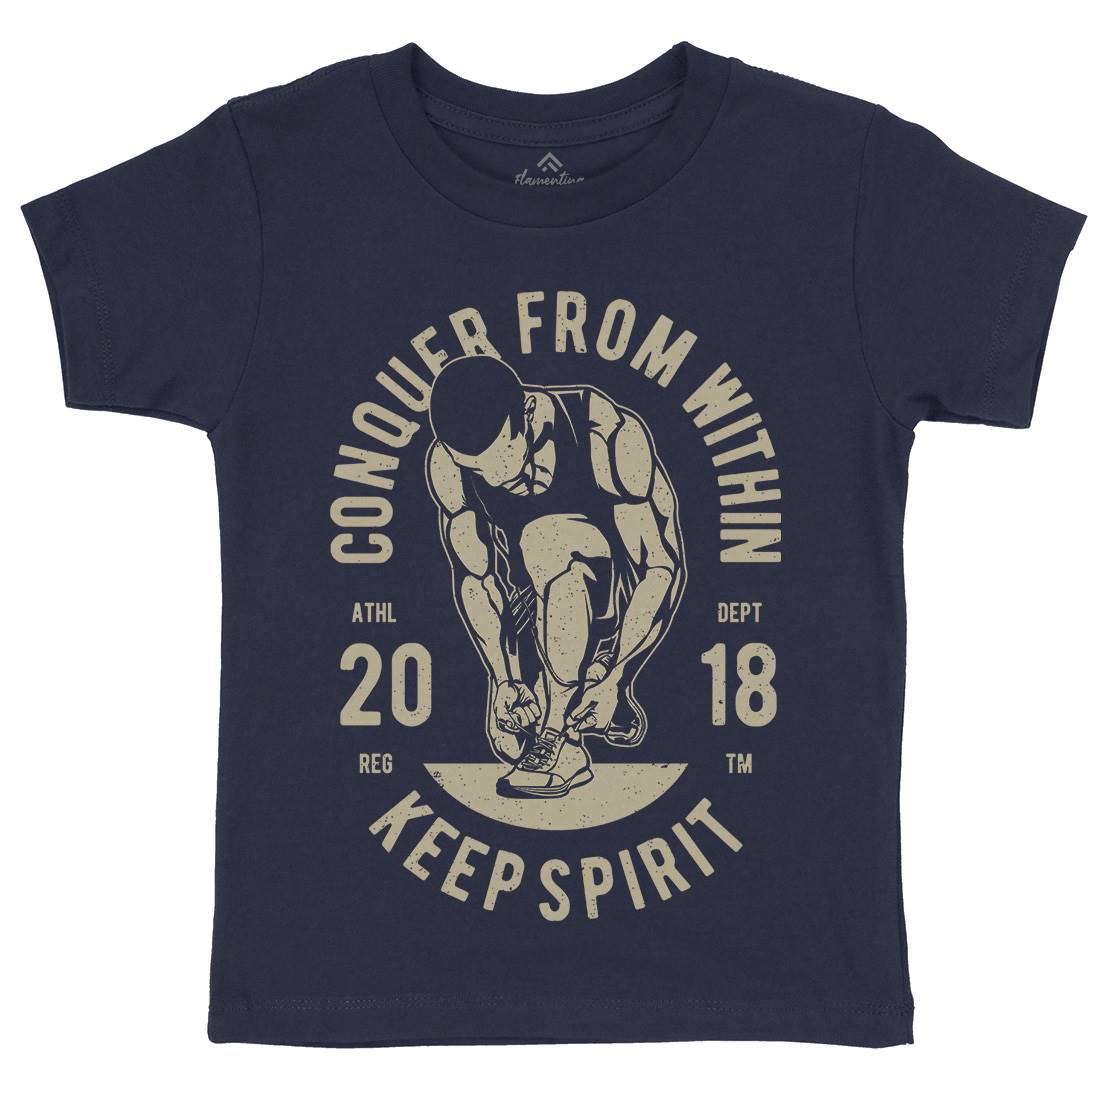 Conquer From Within Kids Crew Neck T-Shirt Sport A638